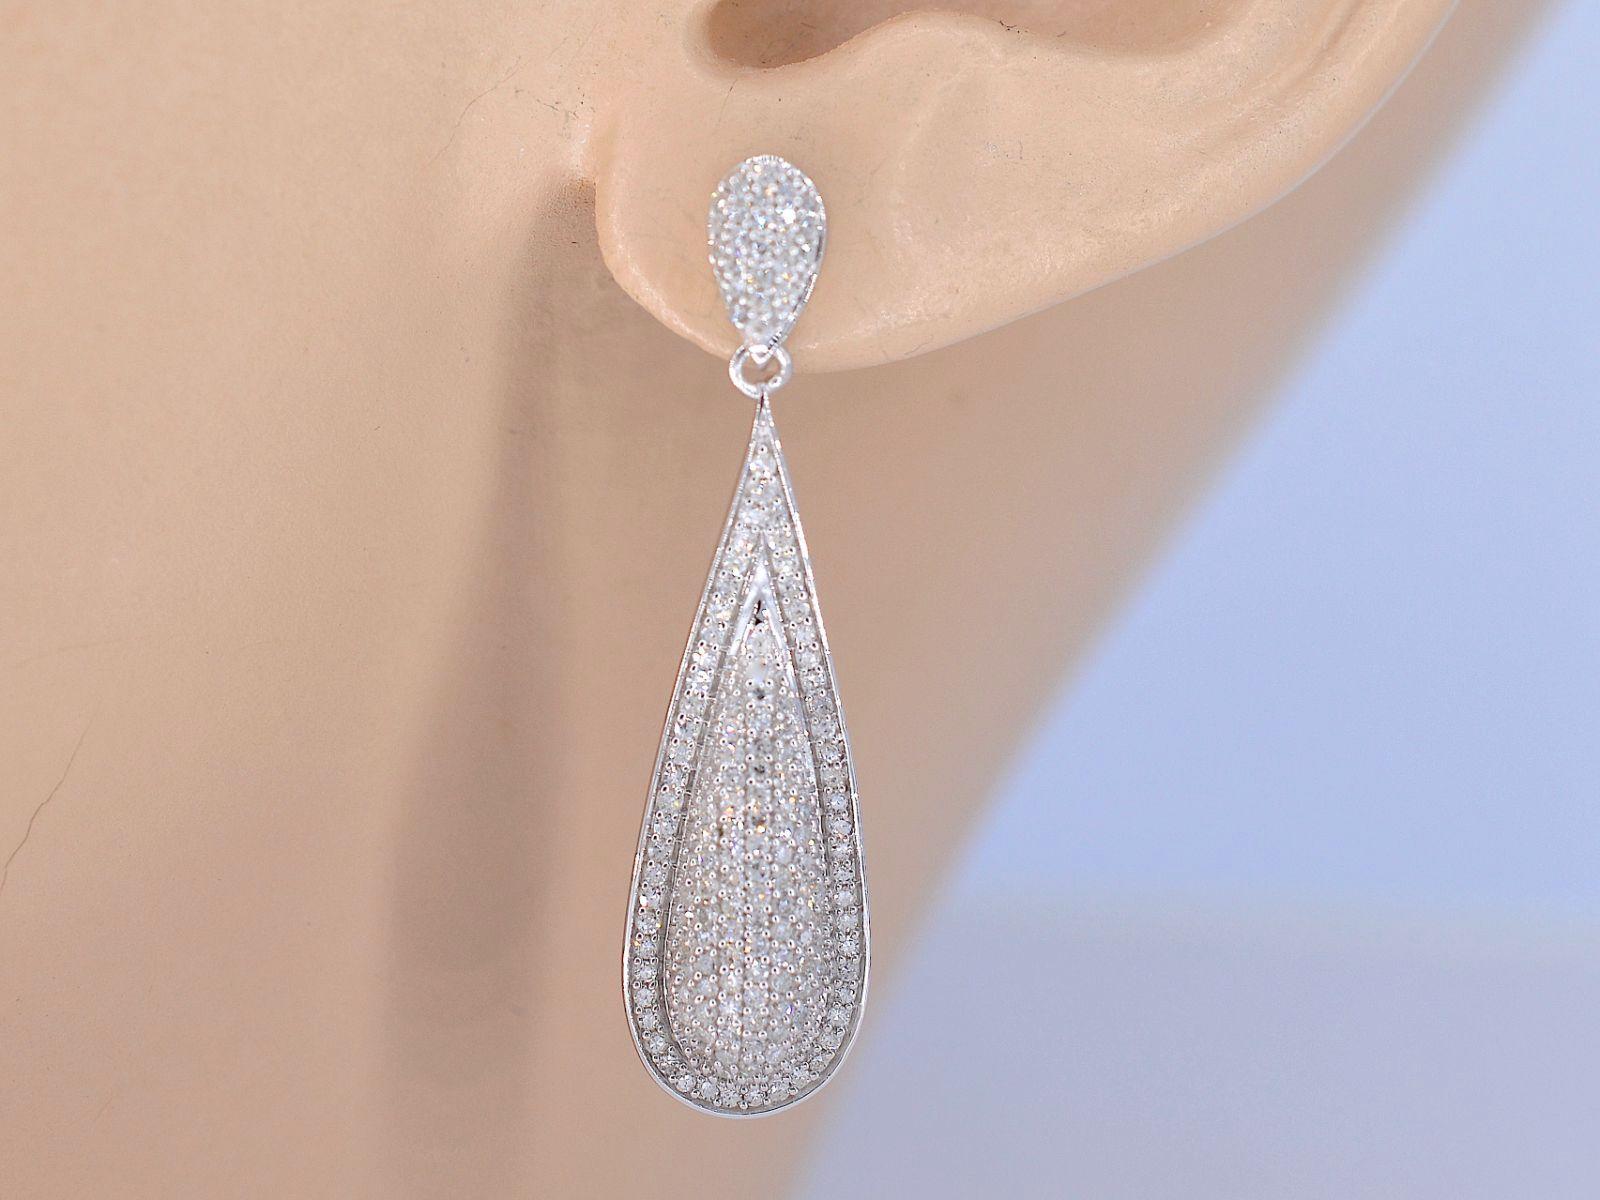 These stunning pair of white gold earrings are encrusted with brilliant Swiss cut diamonds that sparkle and shine in any lighting. The craftsmanship of these earrings is truly remarkable, with each diamond perfectly set to create a seamless and